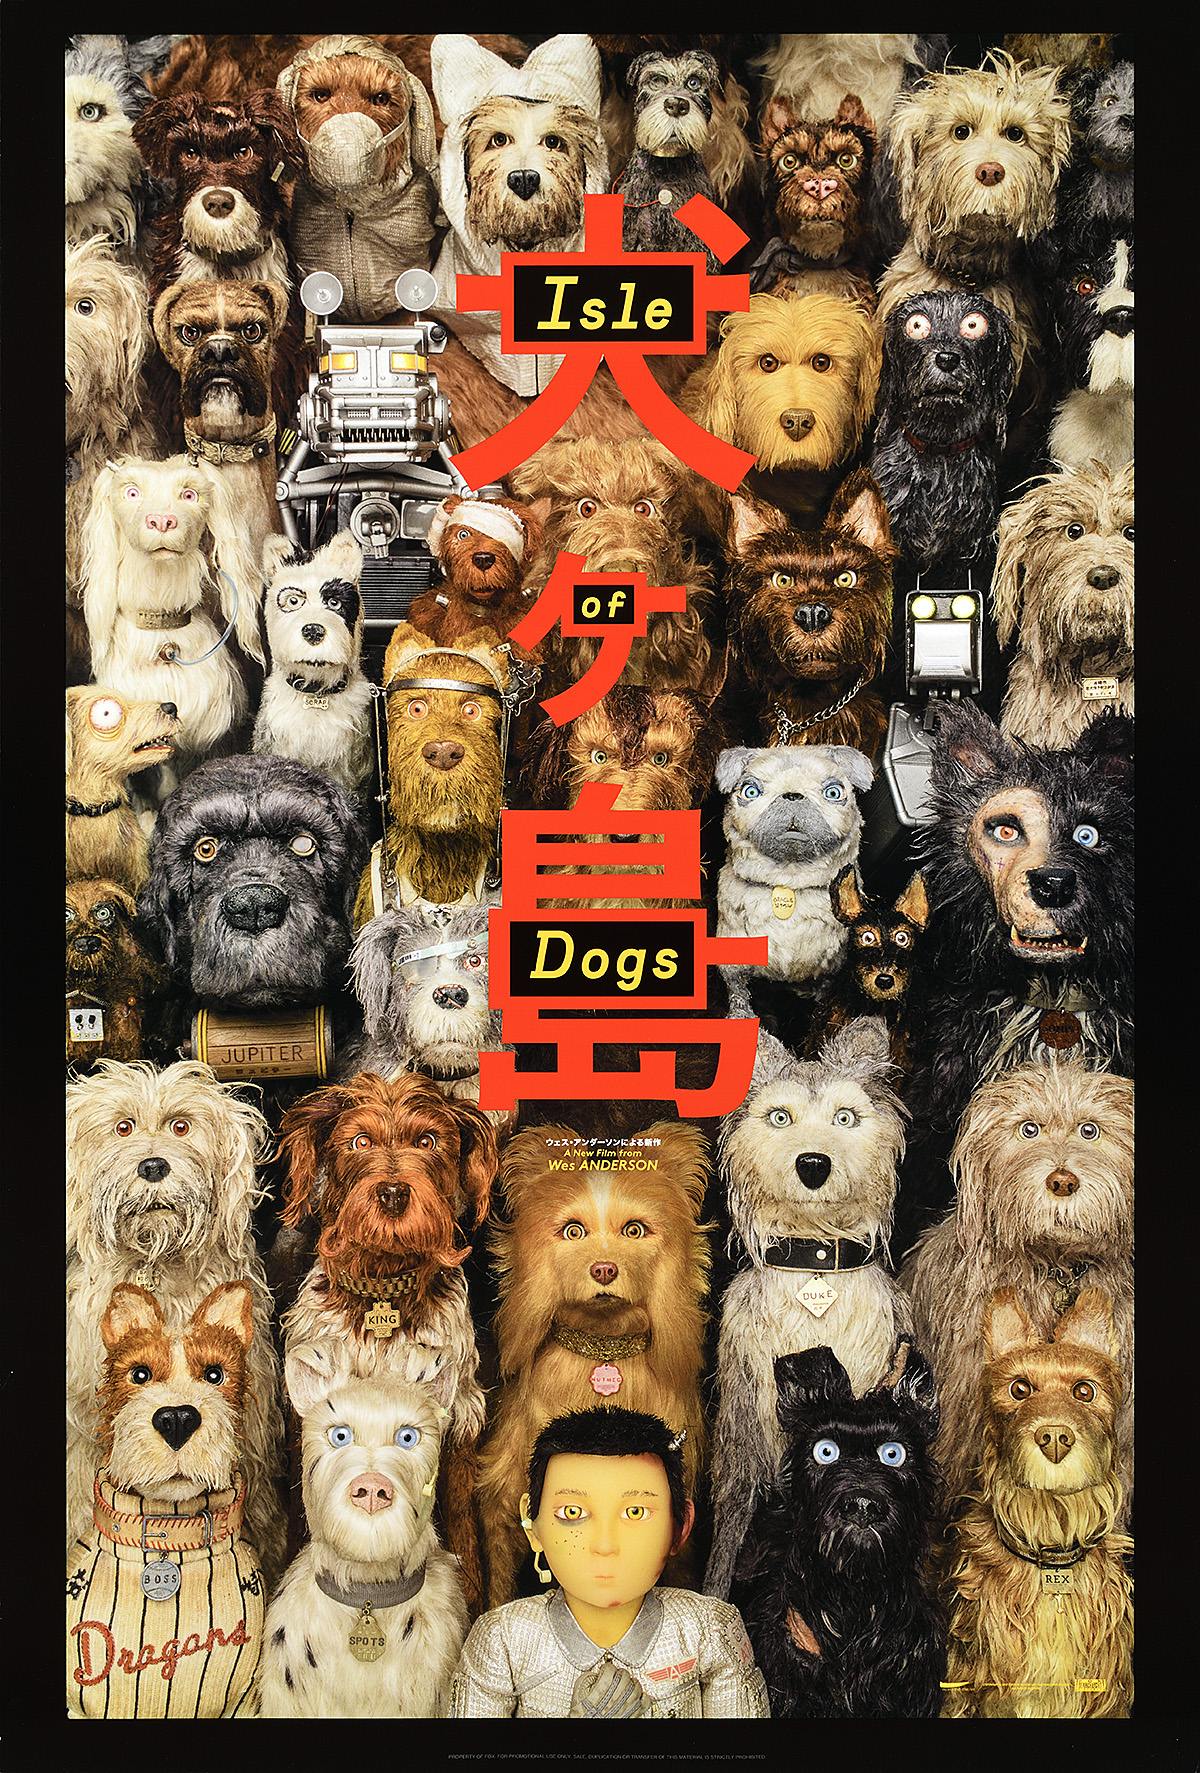 A poster of rows of animated dog puppets, with one human puppet in the center bottom row.